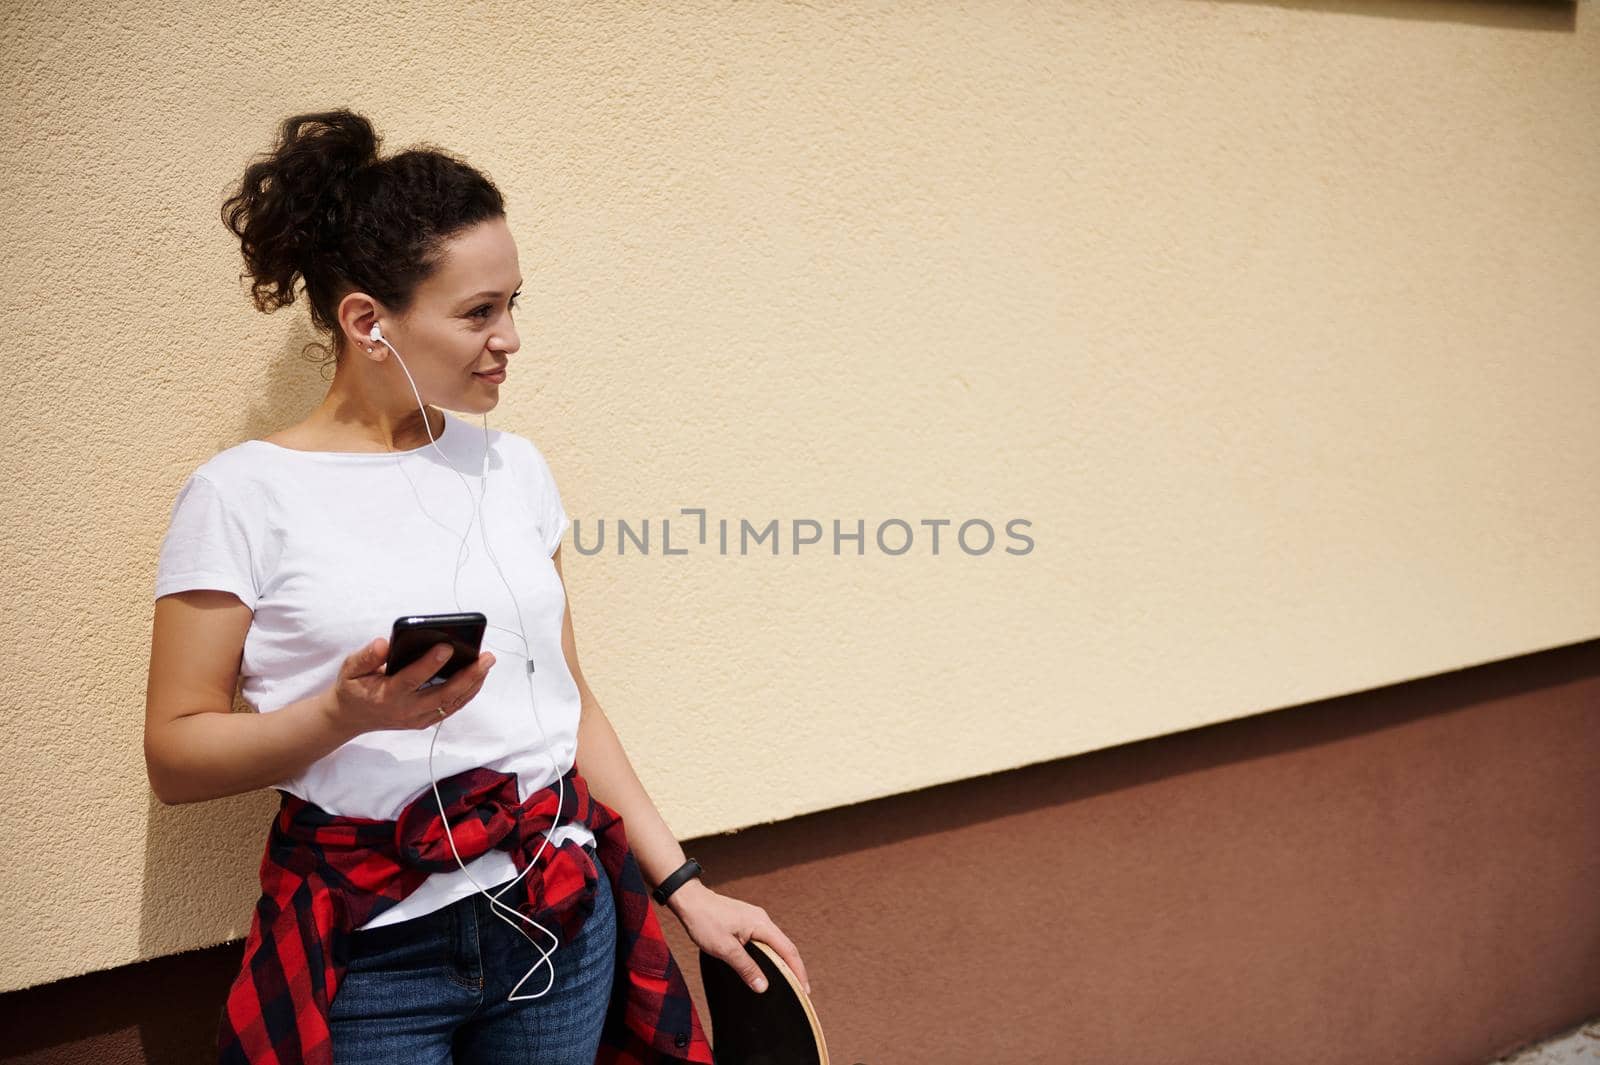 Attractive mixed race young woman with curly hair holding a mobile phone in one hand and a skateboard in the other, looking to the side with her back leaning against a colored wall outdoors